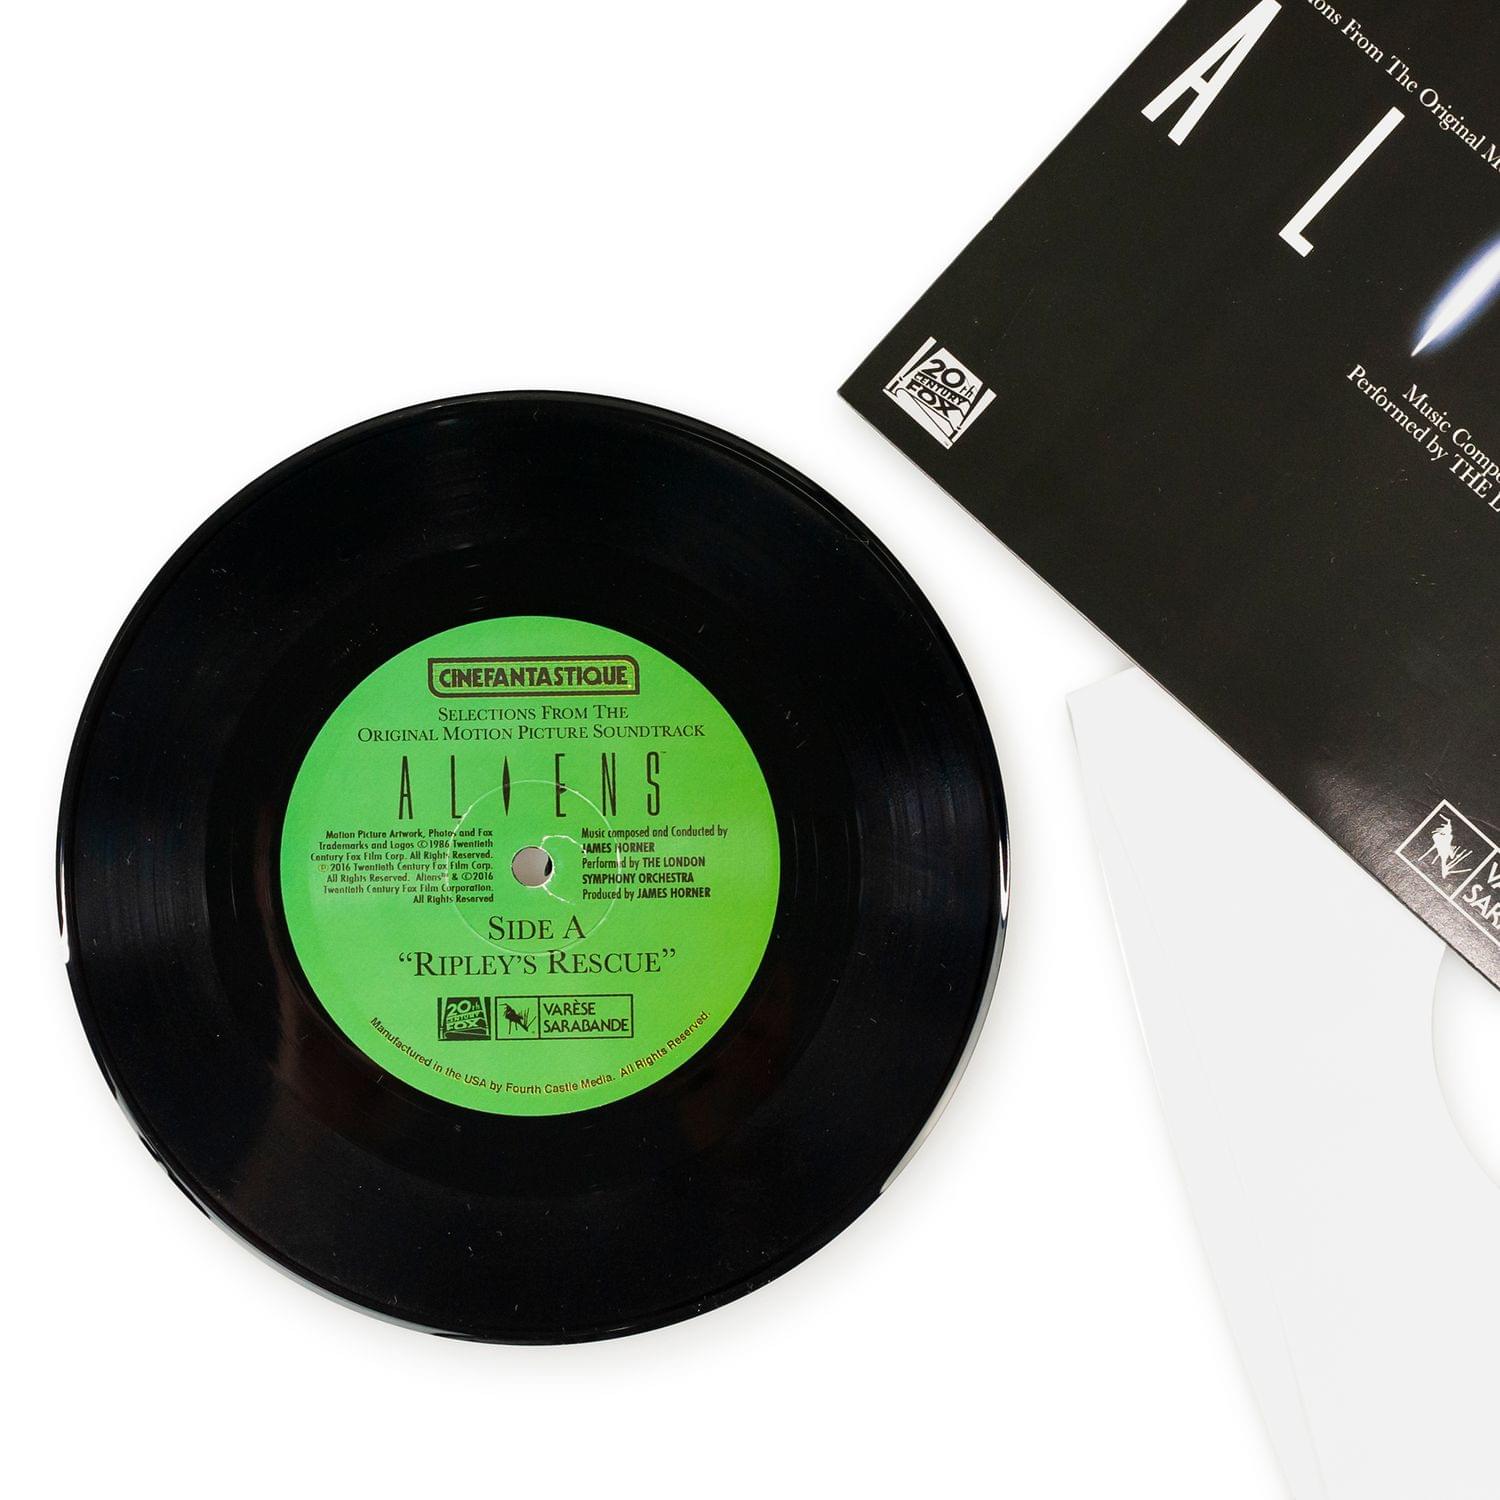 Aliens Collectibles | 30th Anniversary Vinyl Film Score Selections